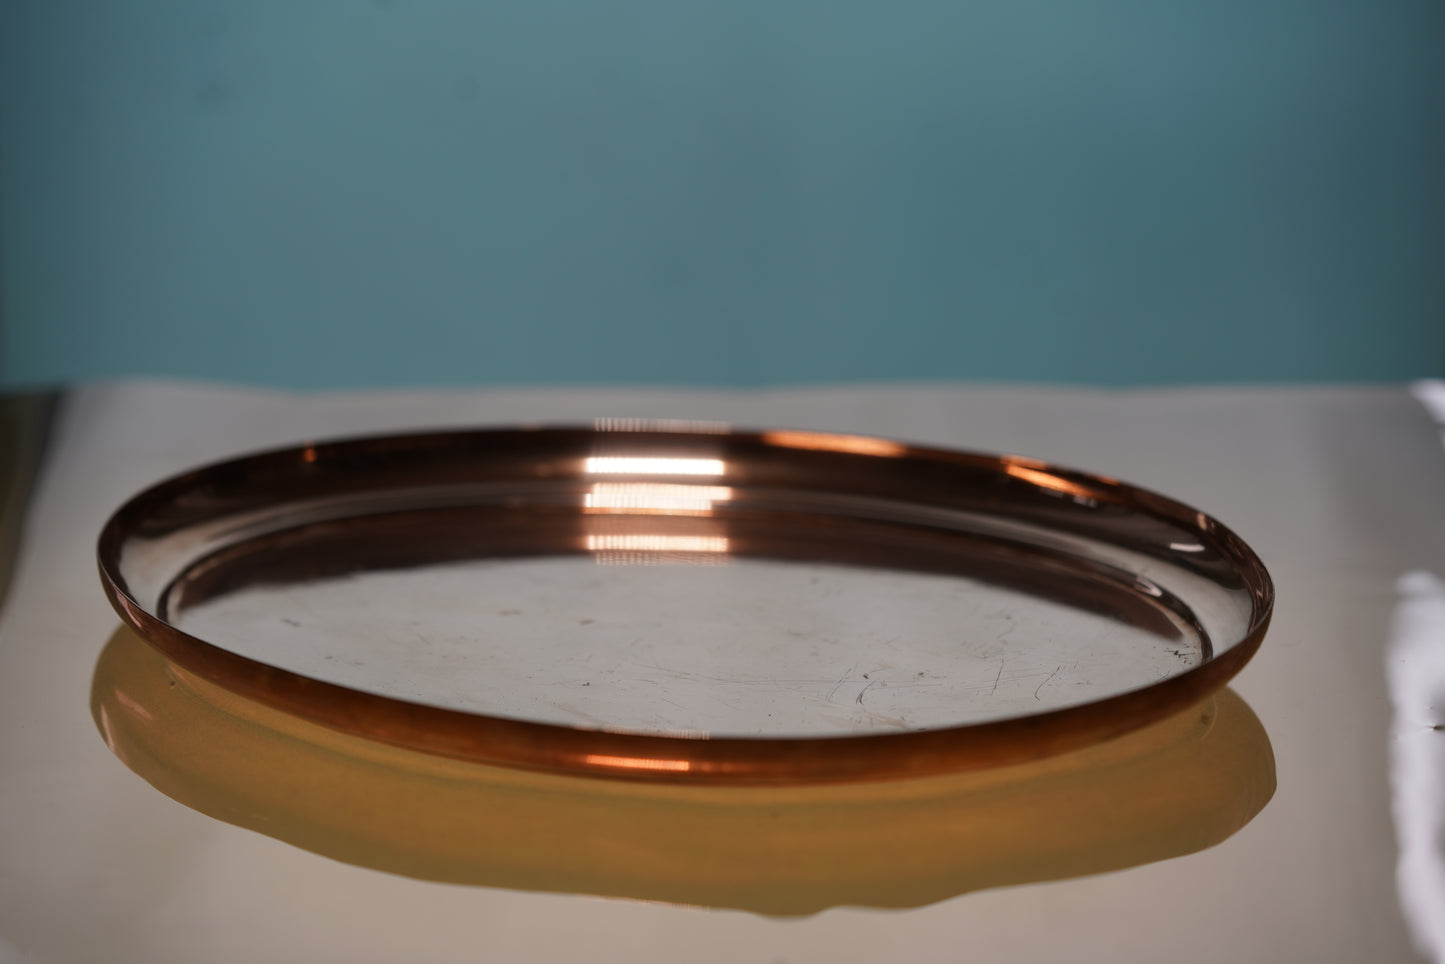 Oval metal tray